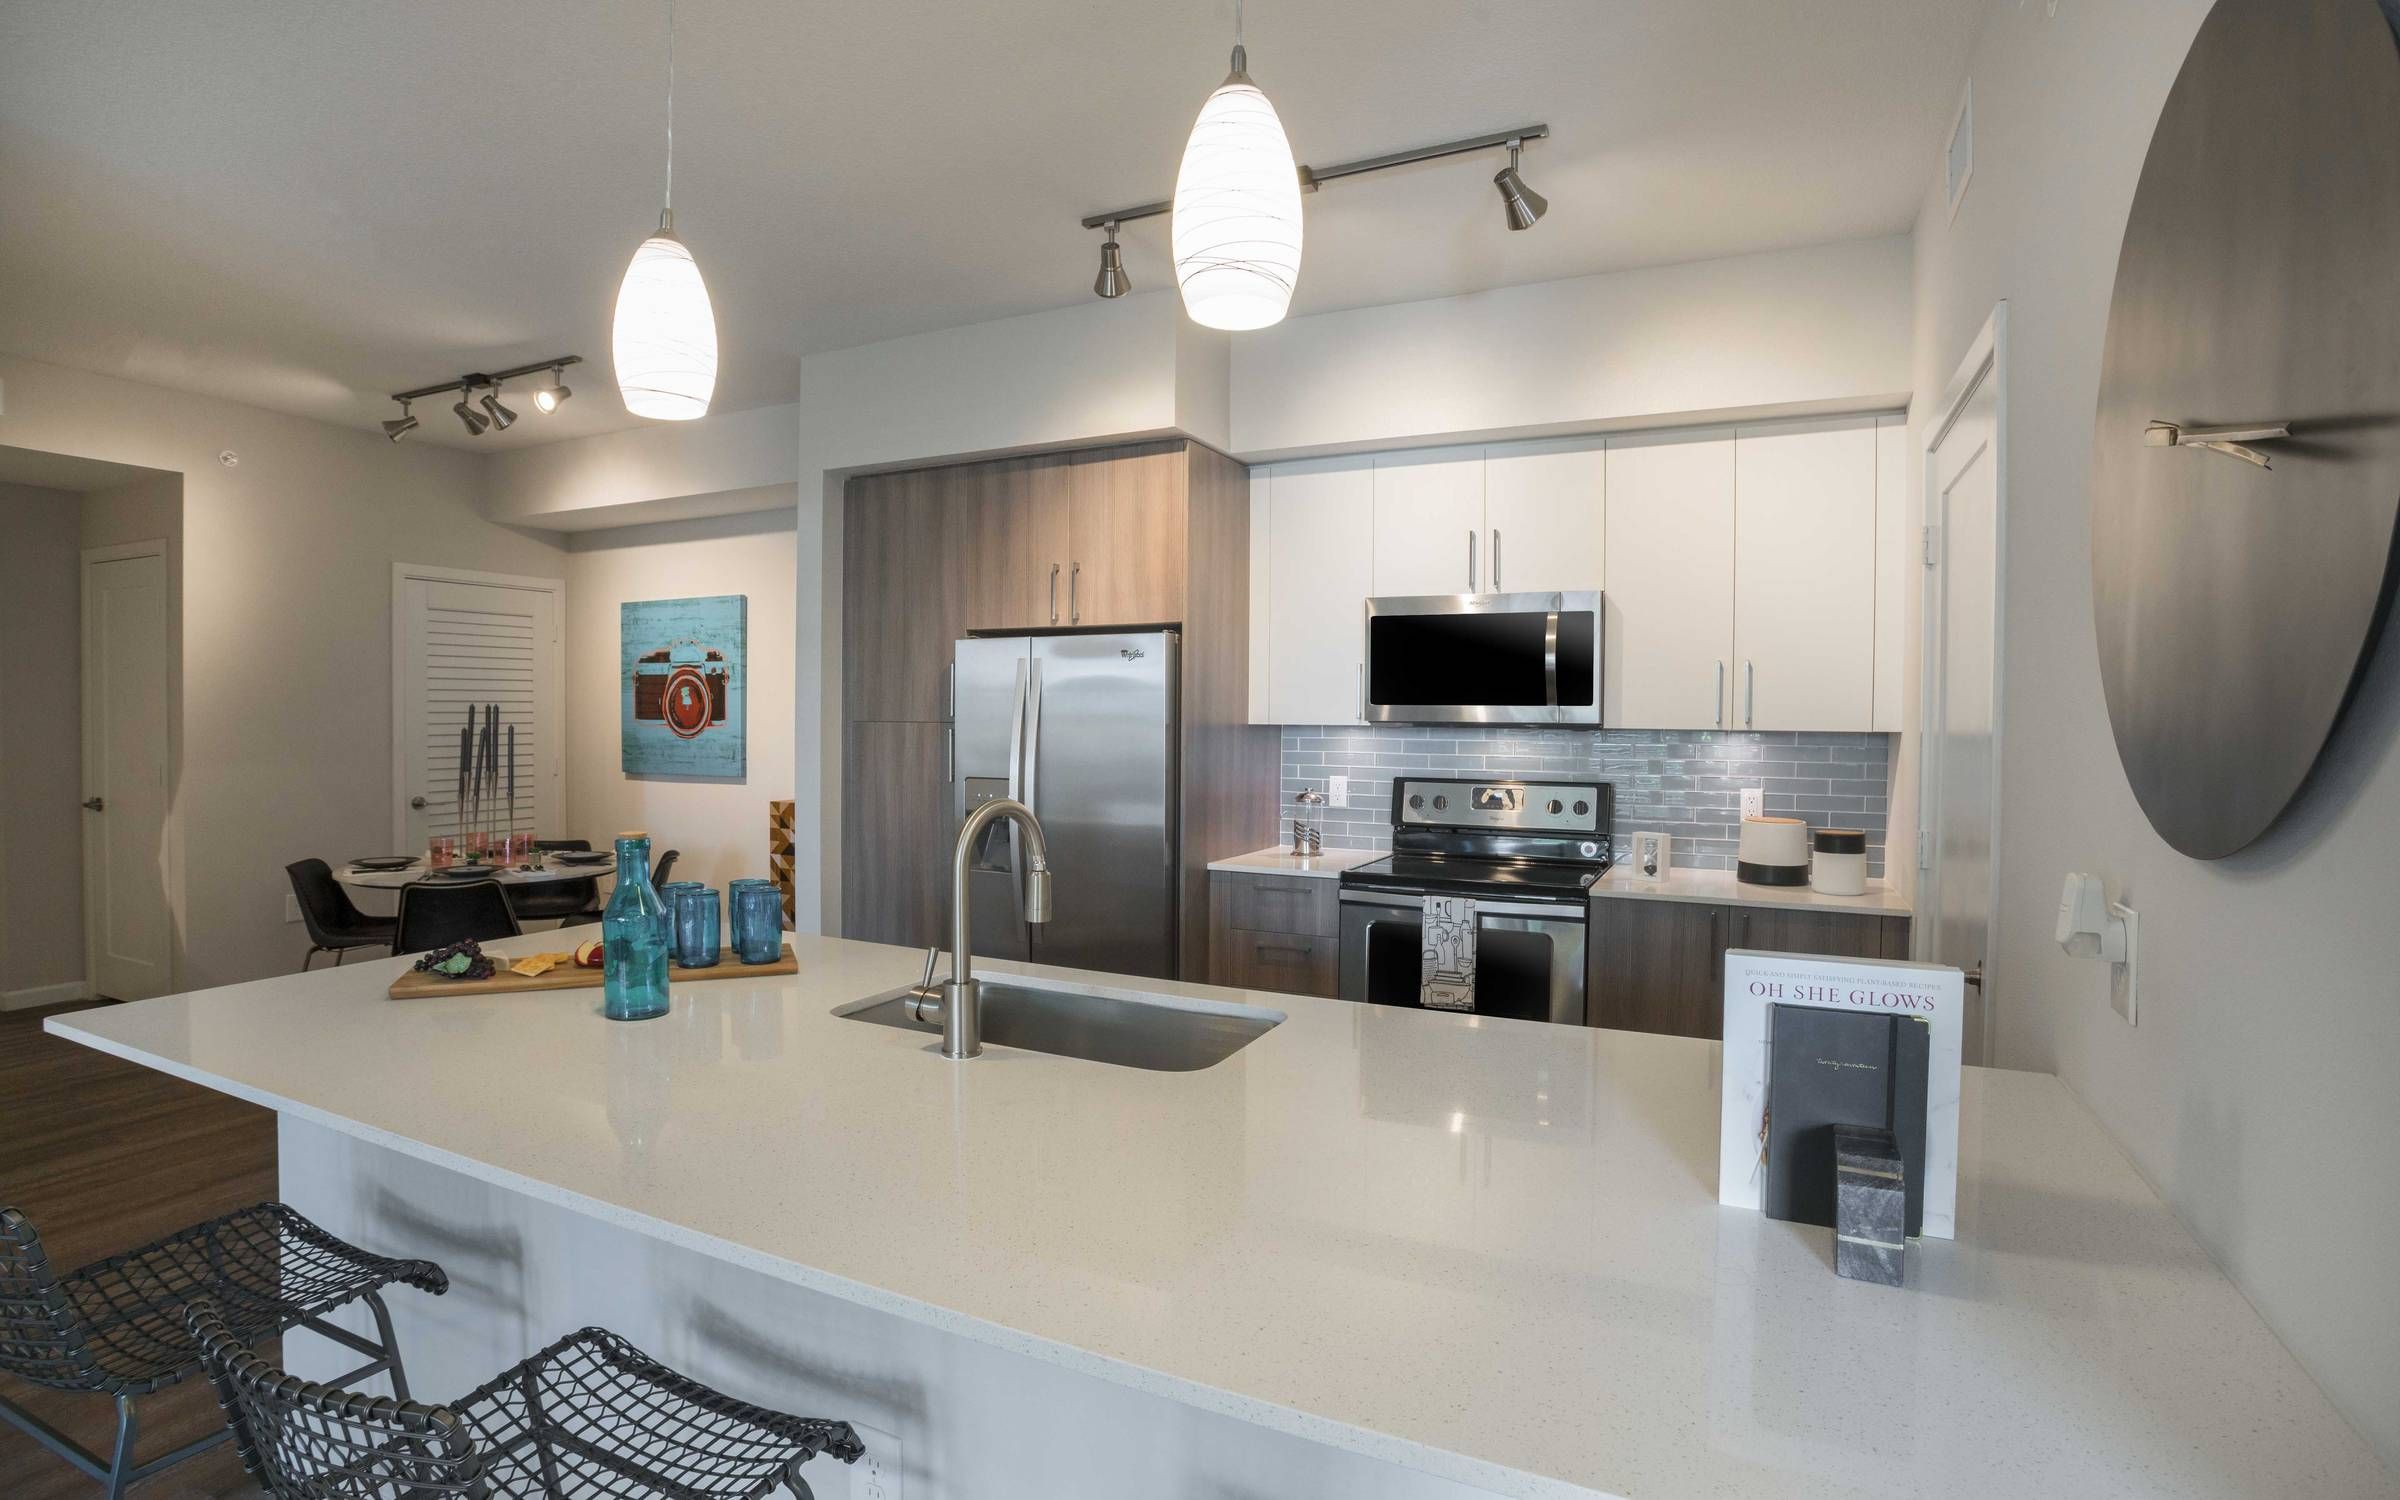 Delray Station kitchen with floating island, grey backsplash, ample cabinet space, and stainless steel appliances.